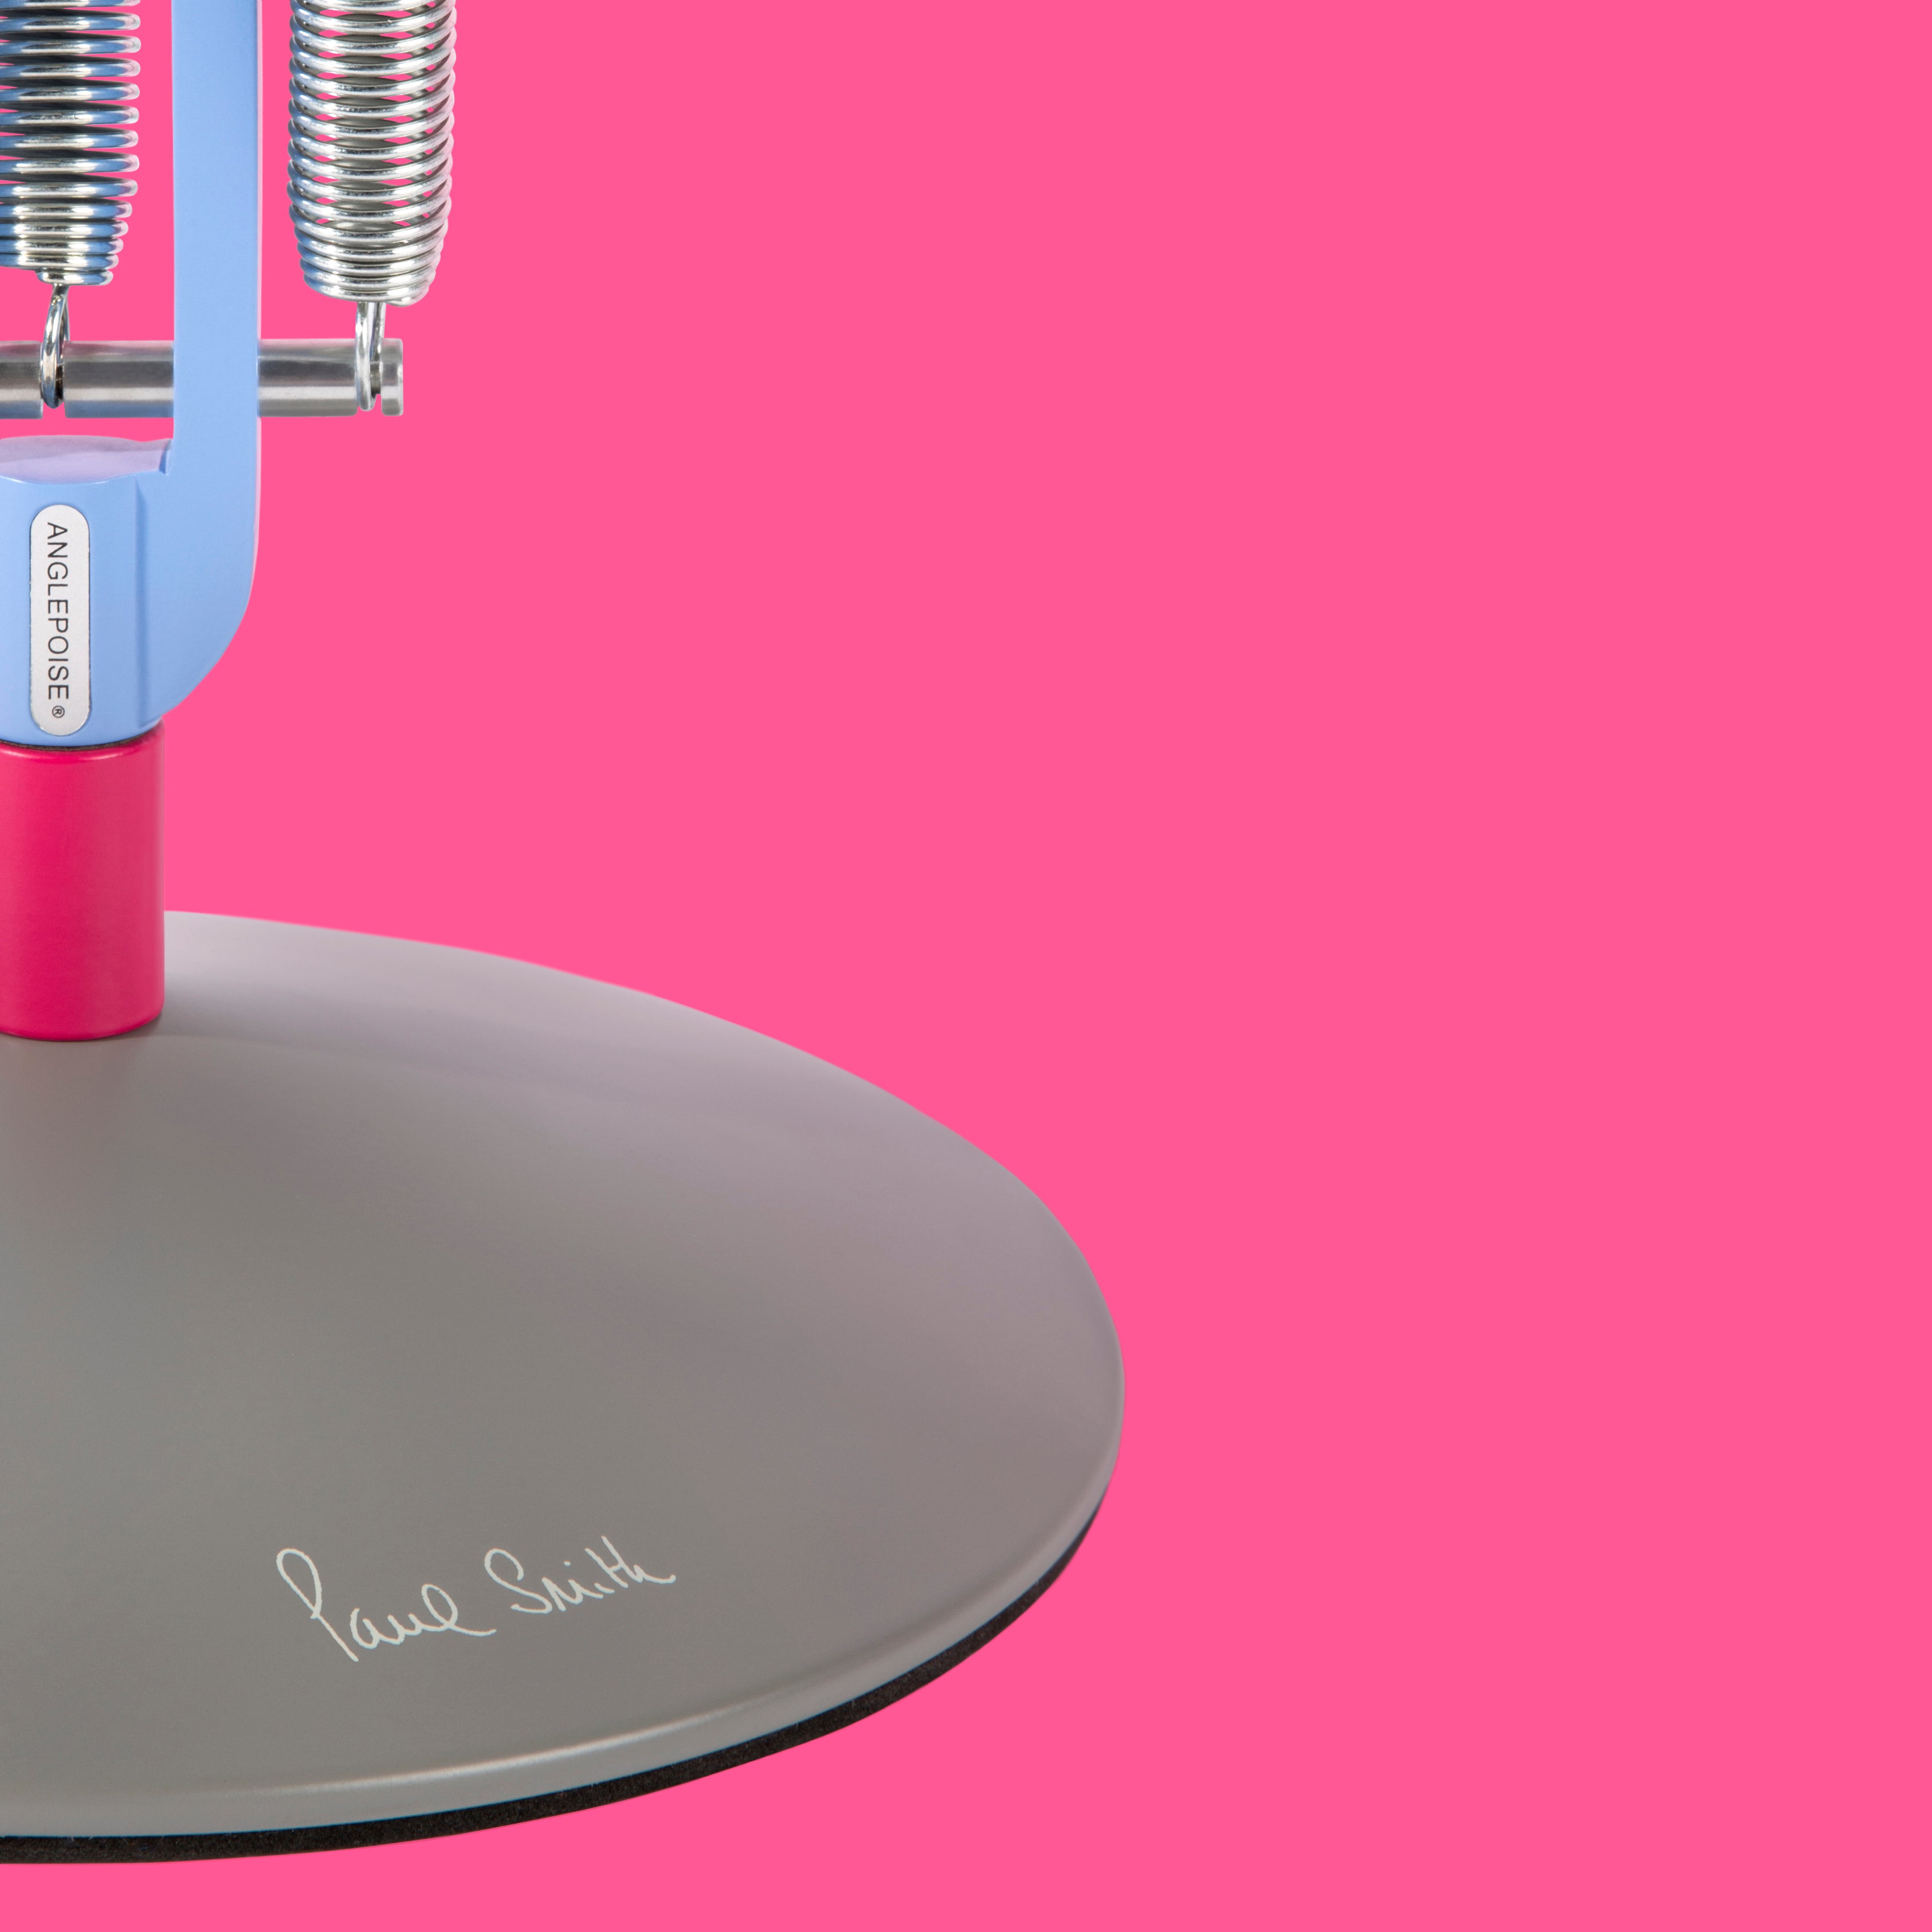 Type 75 Desk Lamp: Paul Smith Edition One